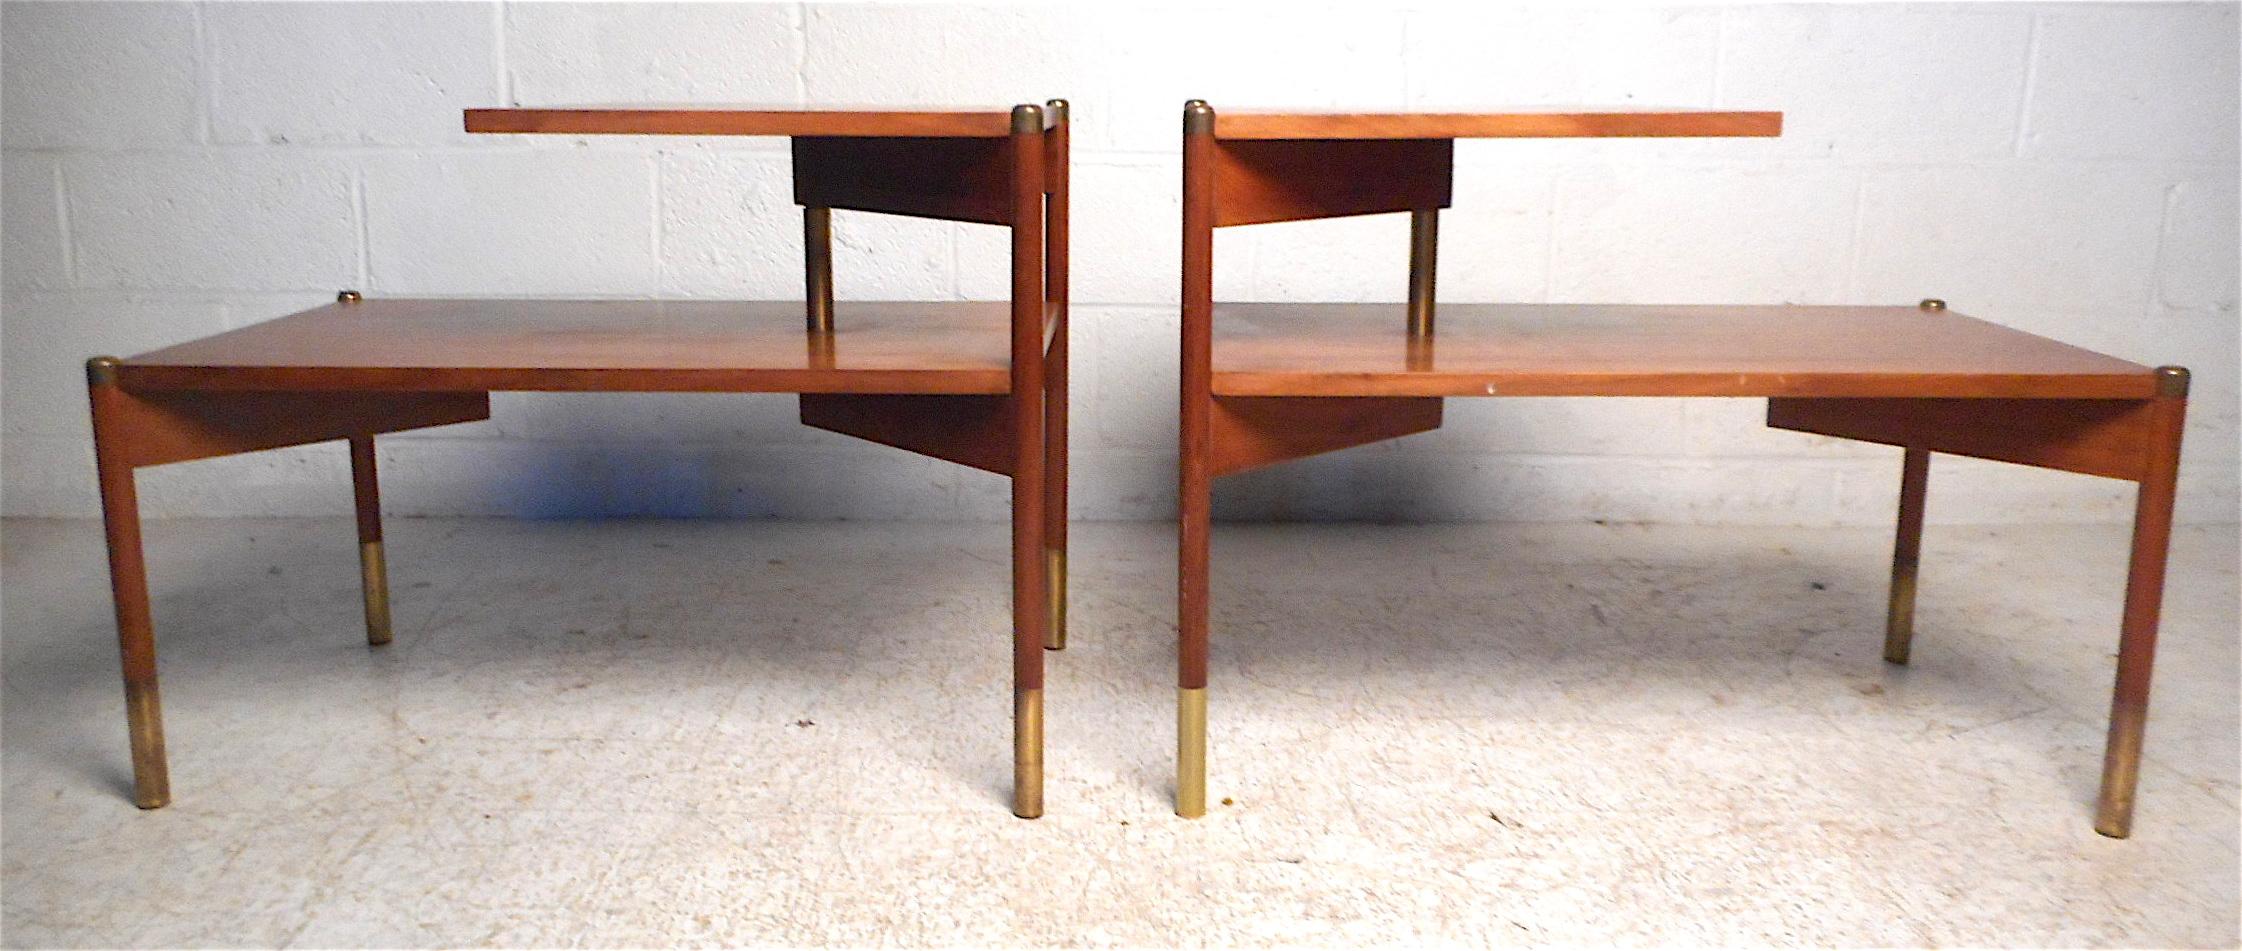 mcm two tier end table